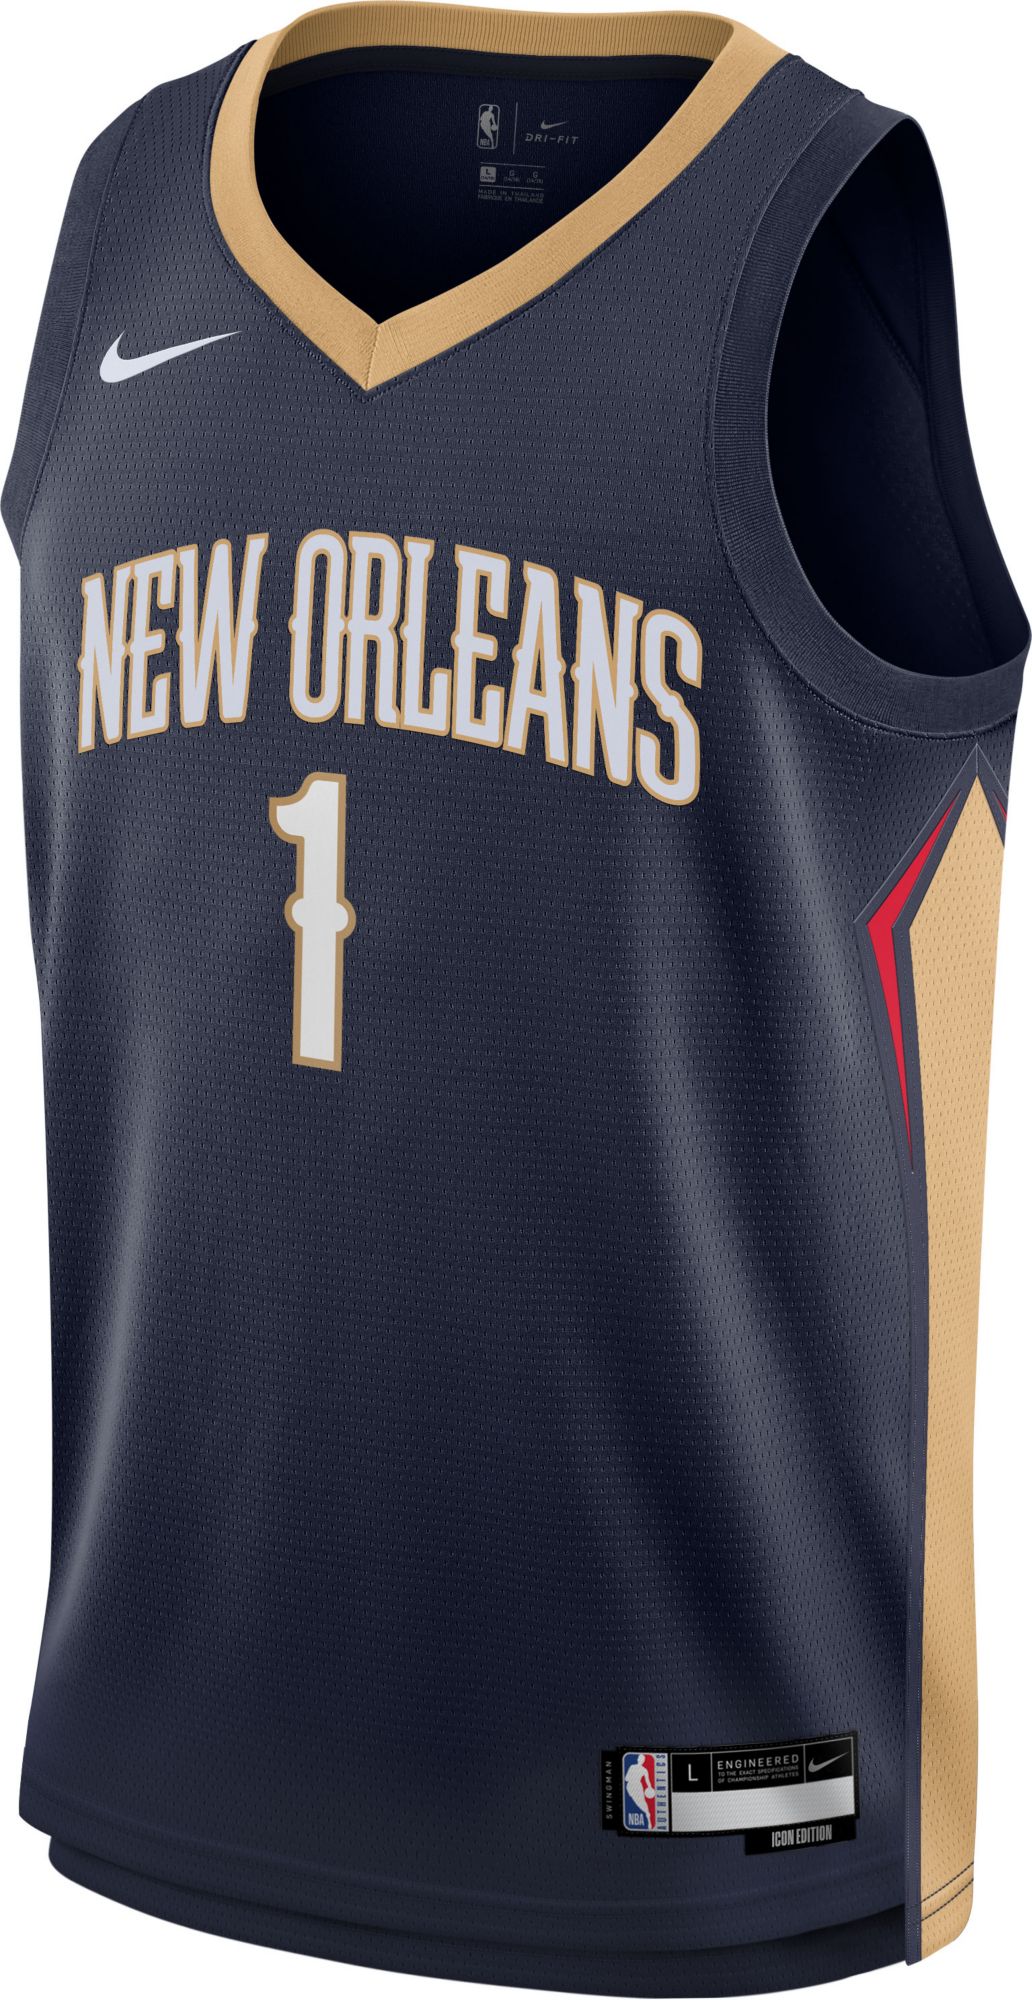 Zion Williamson youth jersey